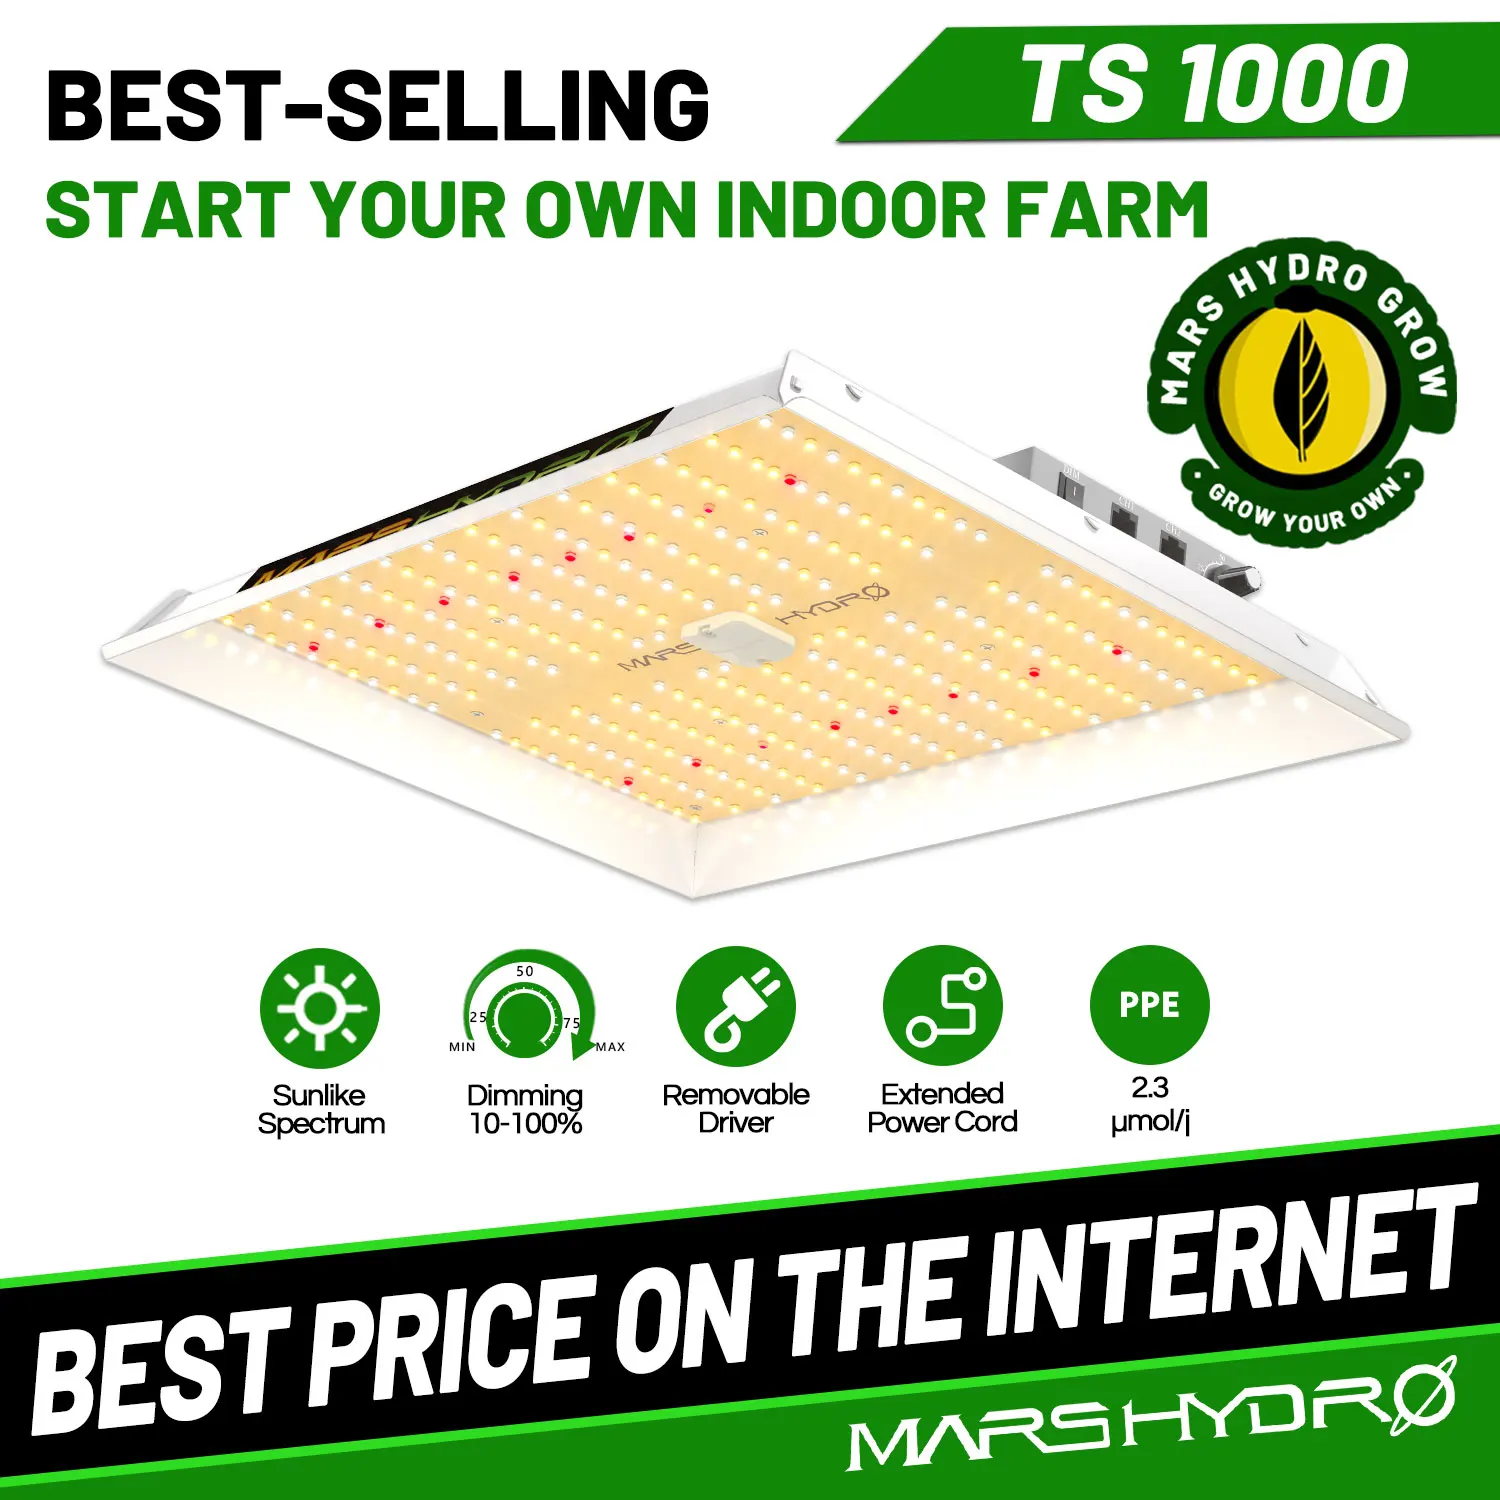 

Mars Hydro TS 1000W Dimmable Led Grow Light Full Spectrum Indoor Plant Hydroponic System with Grow Tent and Grow Lights Panel